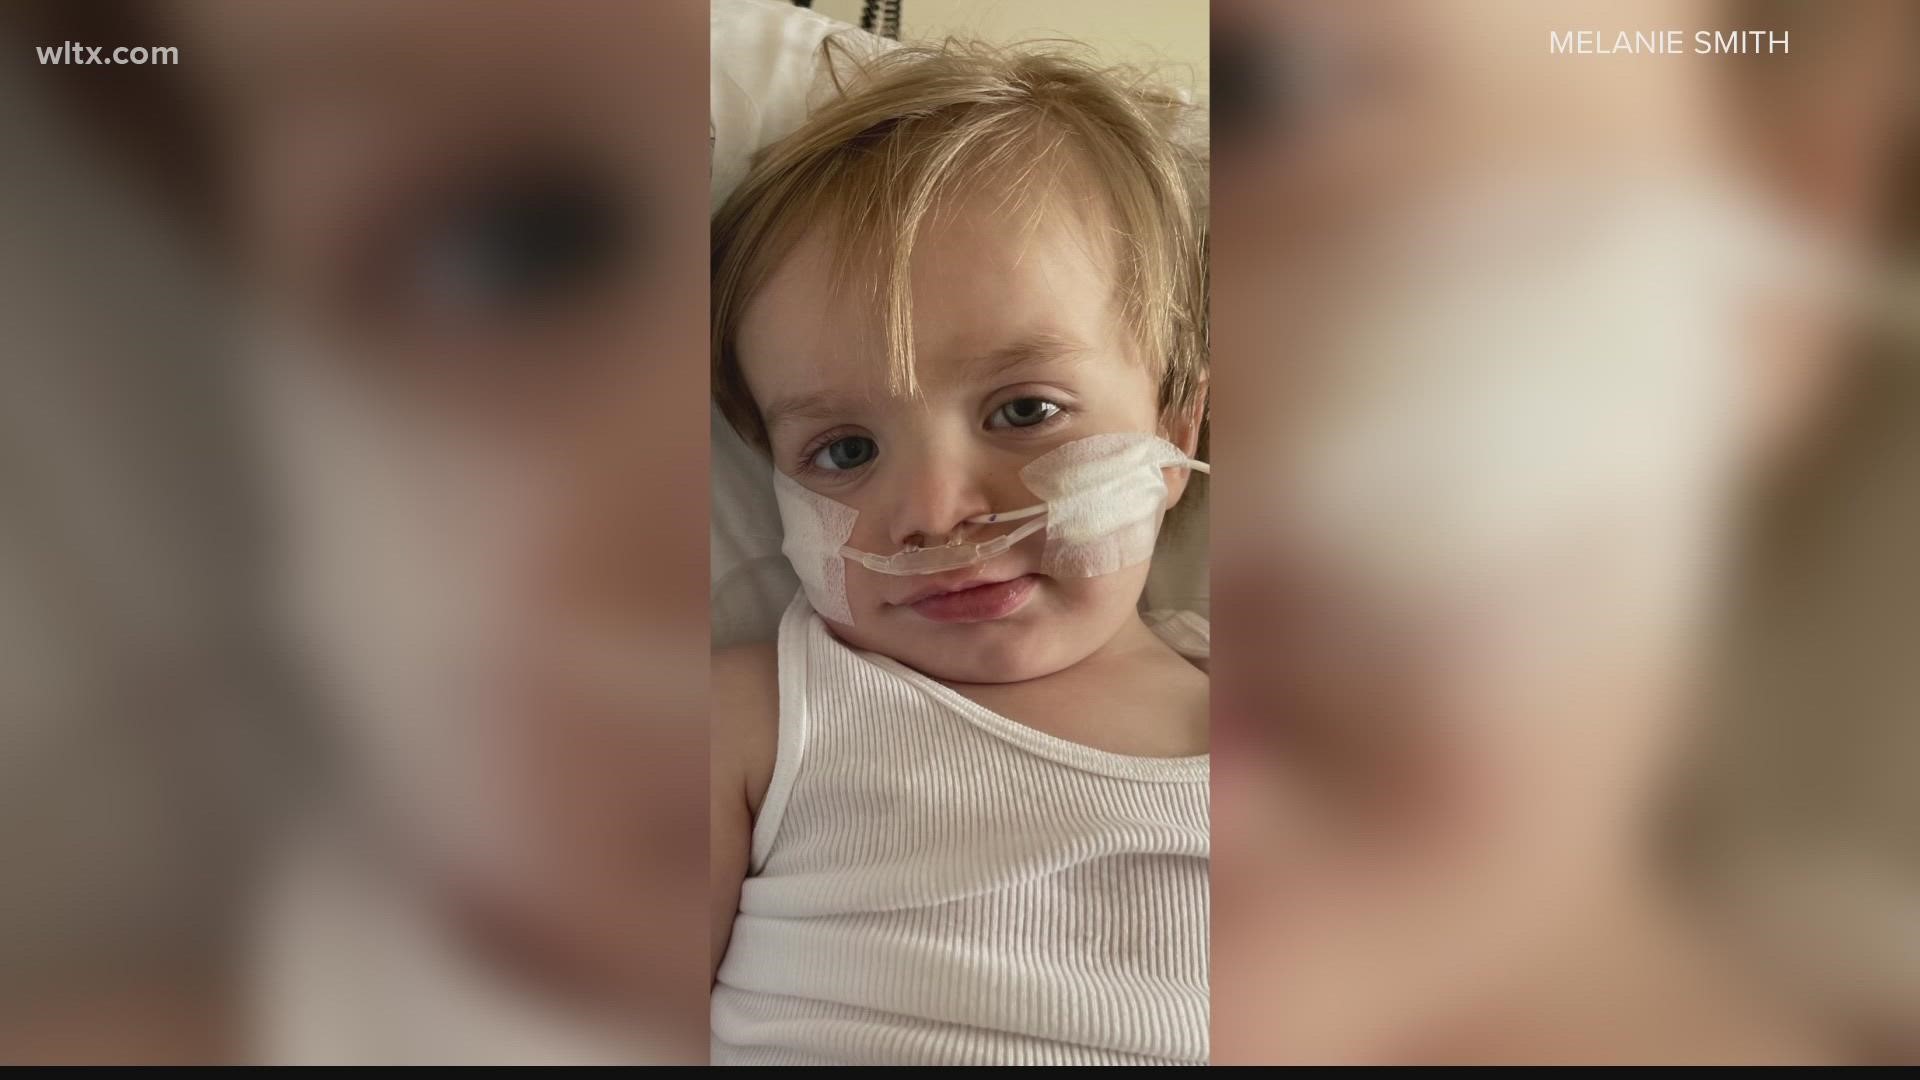 18-month-old Dominic Smith was diagnosed with a grade two ependymoma. As he starts his treatment journey, the community is fundraising to help with medical costs.